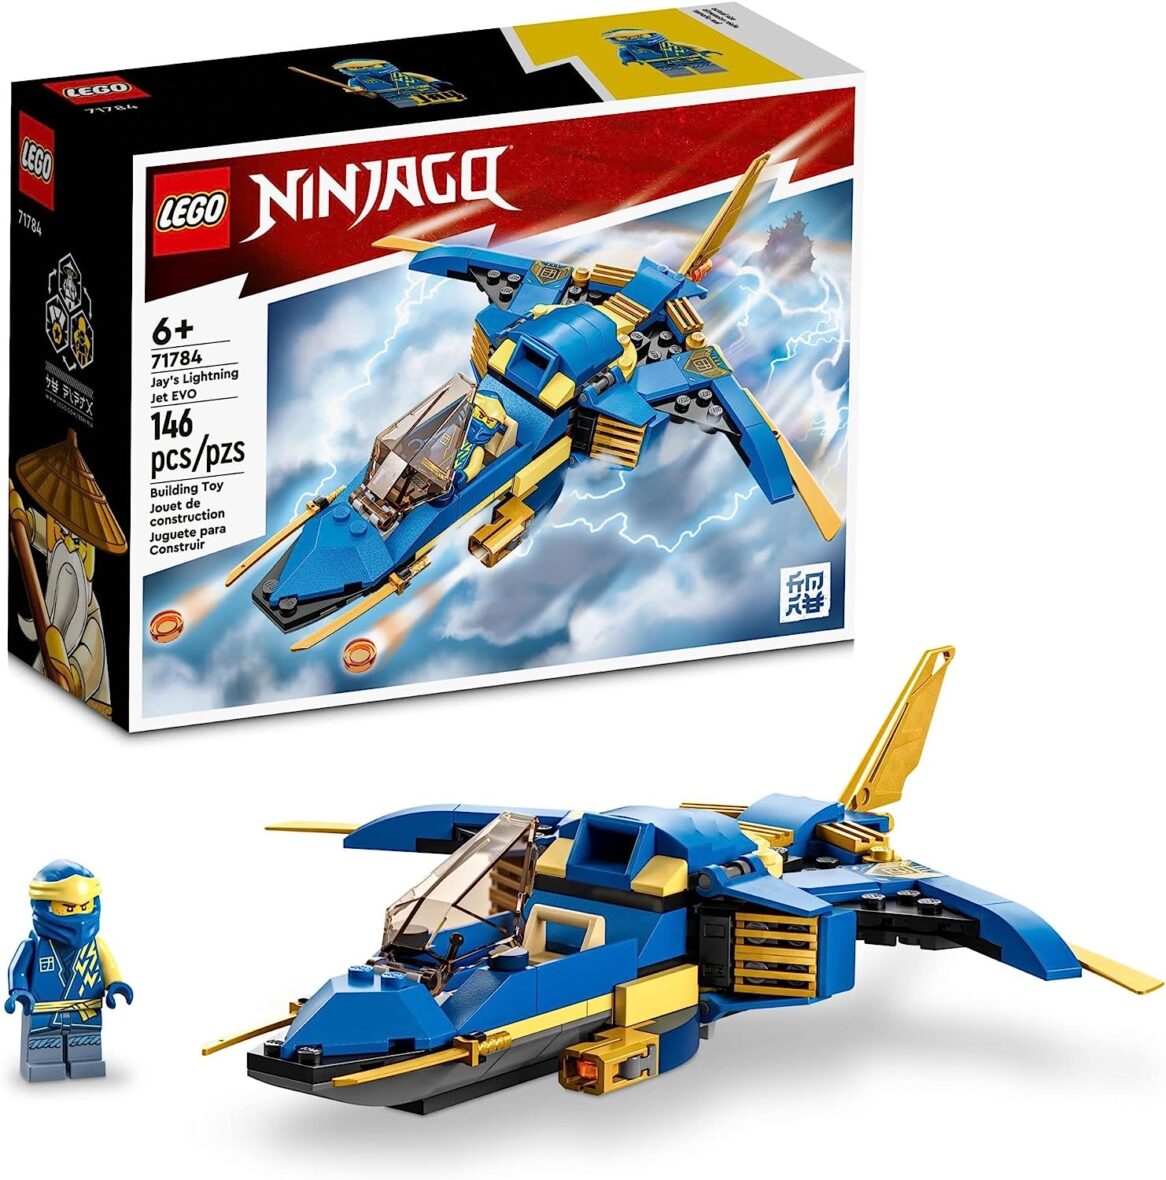 LEGO NINJAGO Jay’s Lightning Jet EVO 71784, Upgradable Toy Plane, Ninja Airplane Building Set, Collectible Birthday Gift Idea for Grandchildren, Kids, Boys and Girls Ages 7 and Up